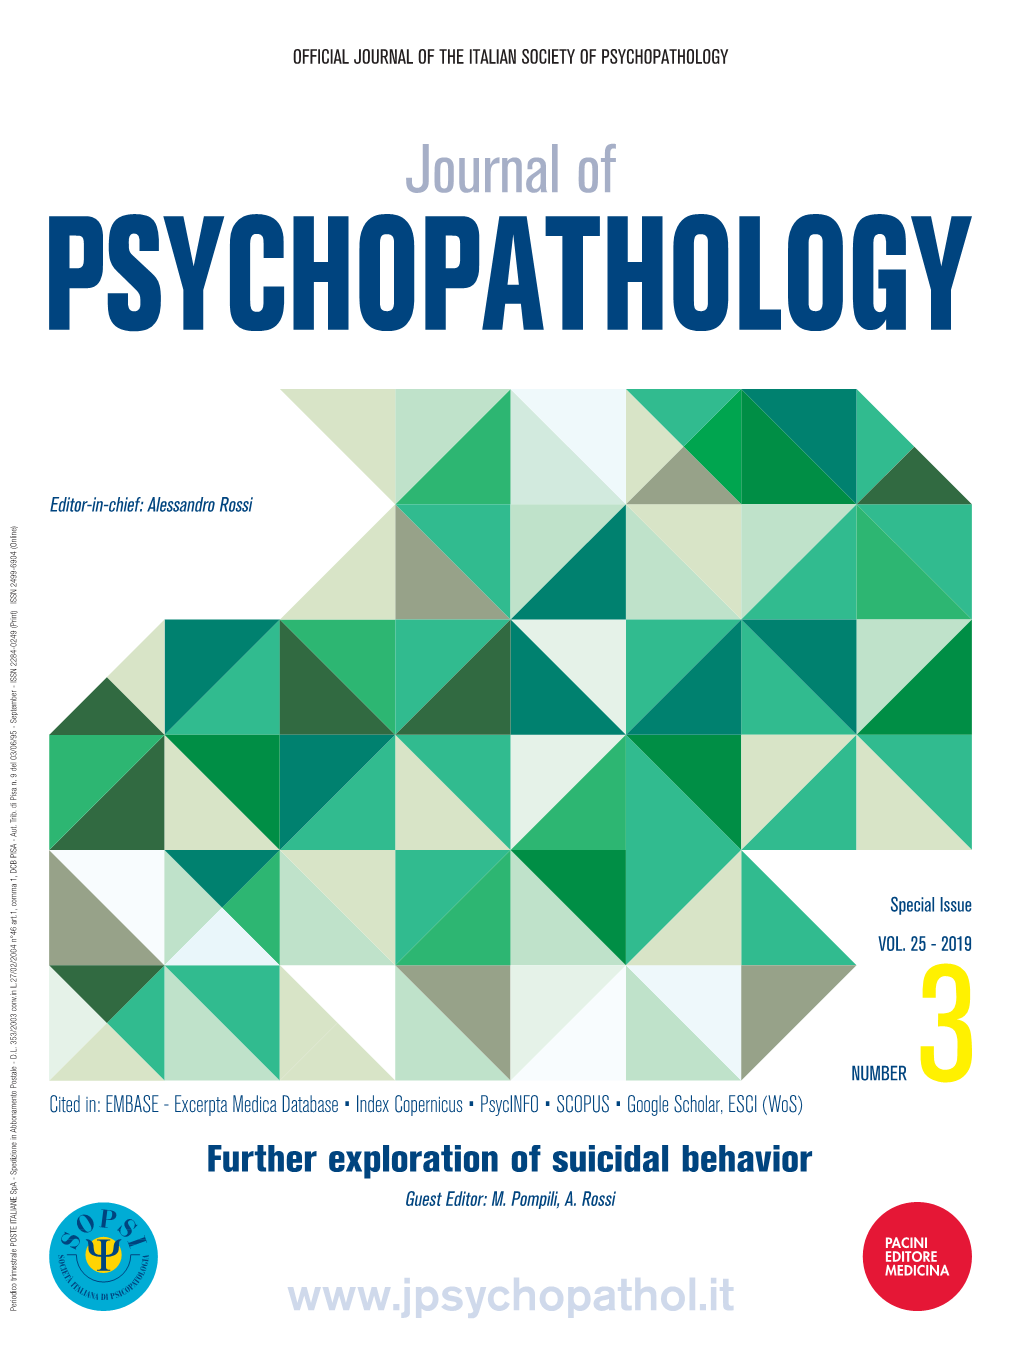 Suicide in Obsessive-Compulsive Related Disorders: Prevalence Rates and Psychopathological Risk Factors U